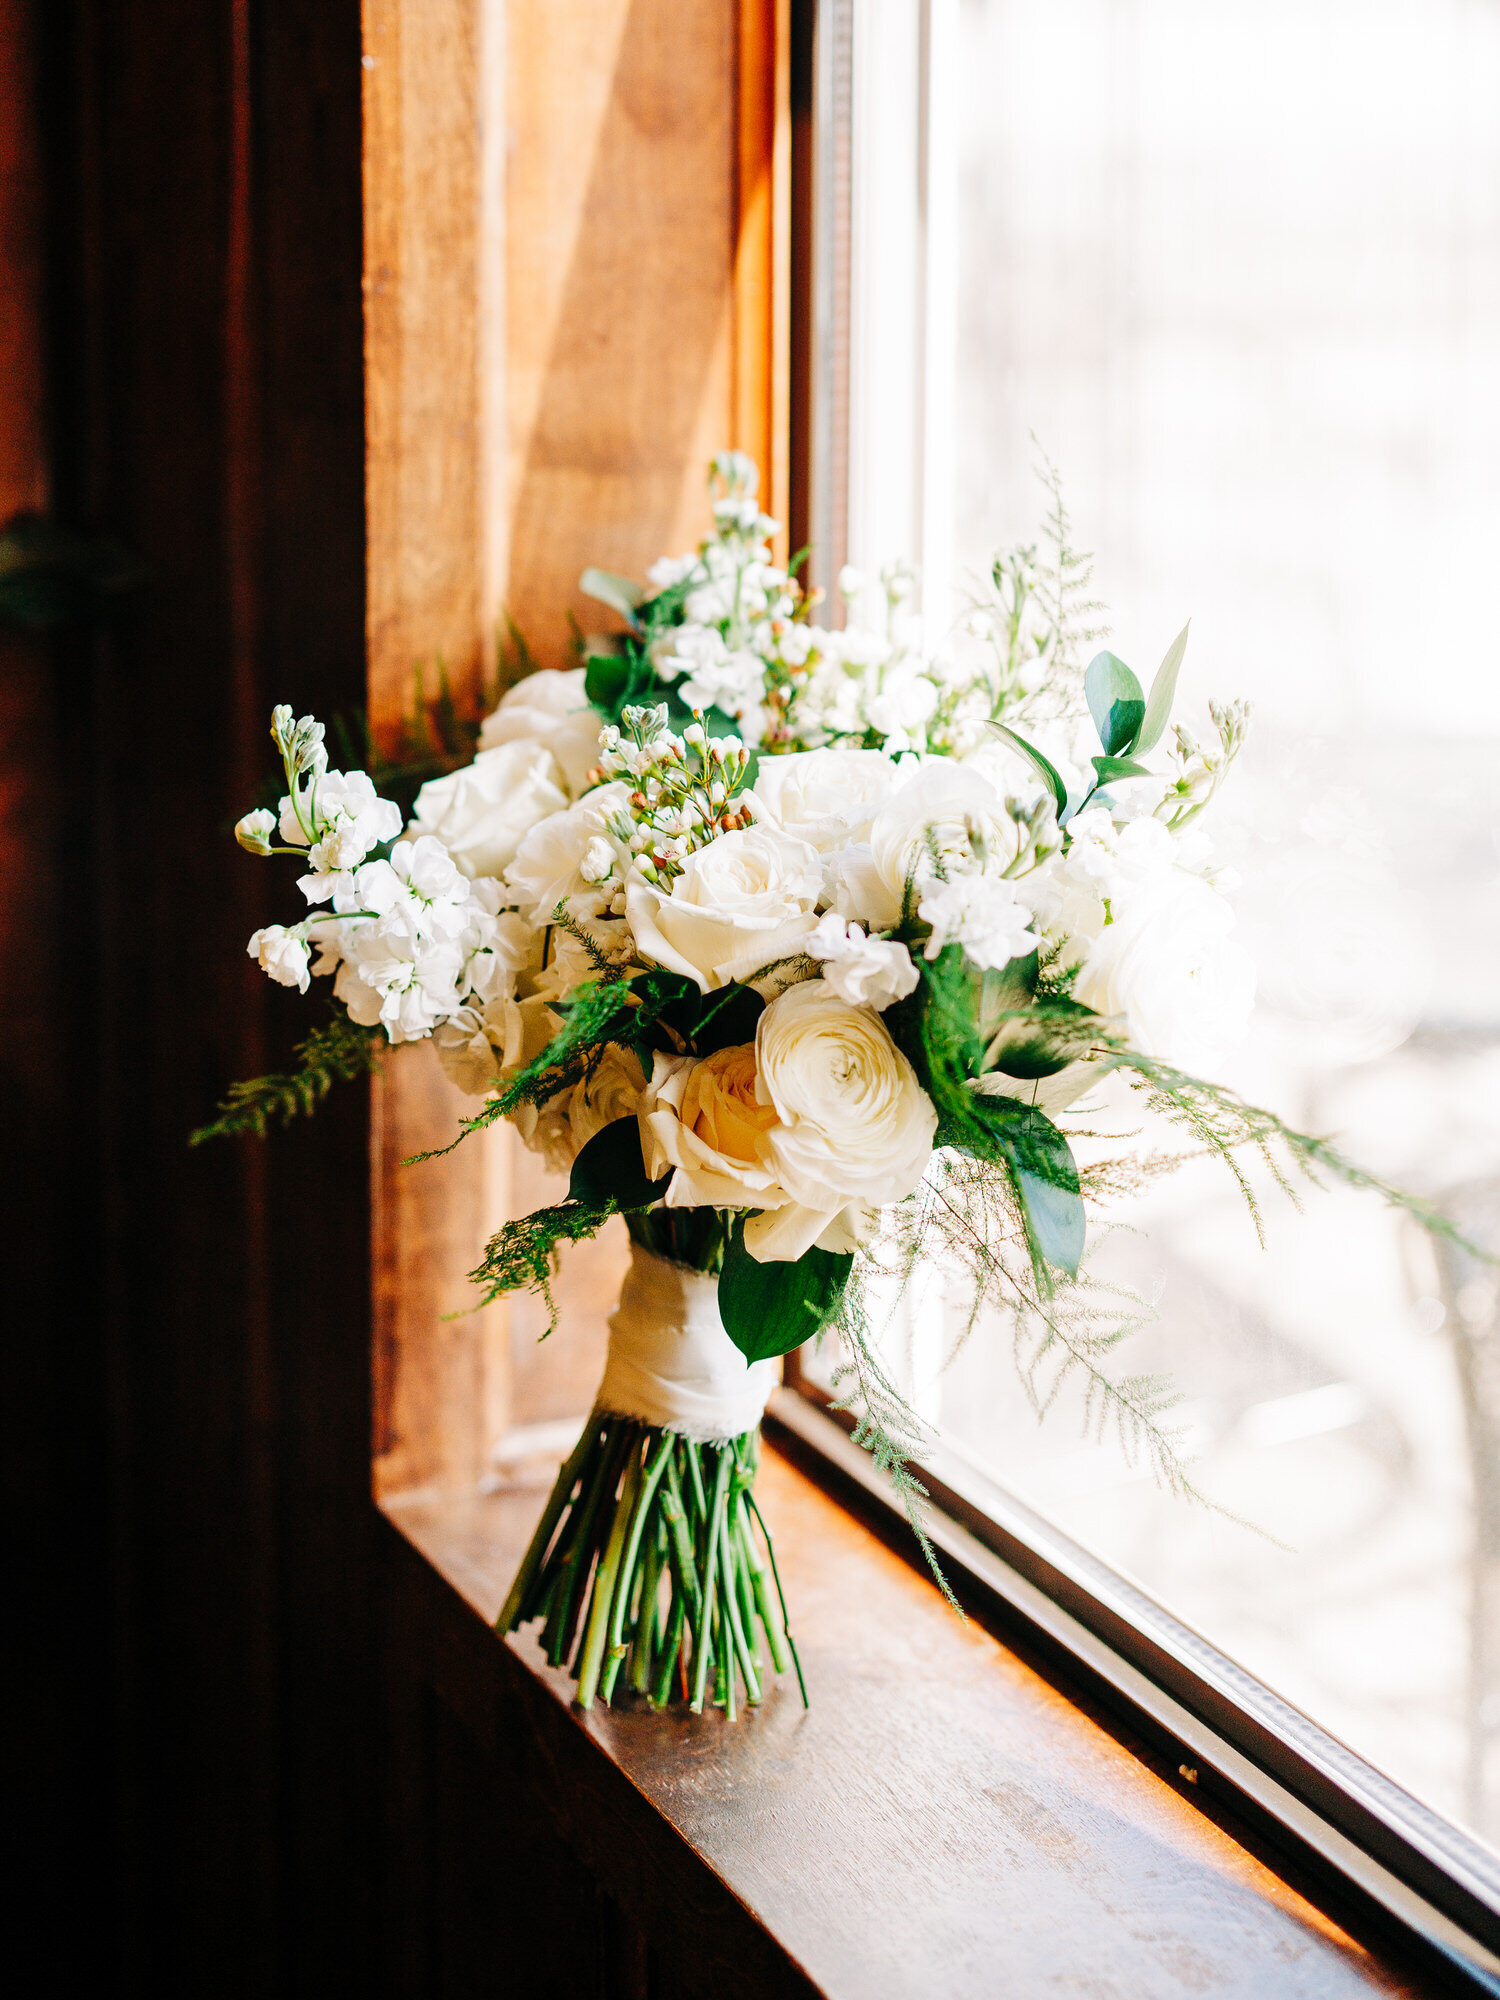 This image, taken by San Antonio wedding photographer KD Captures, features a white floral bouquet with baby's breath and white roses paired with other greenery. The bouquet is propped up on a windowsill.